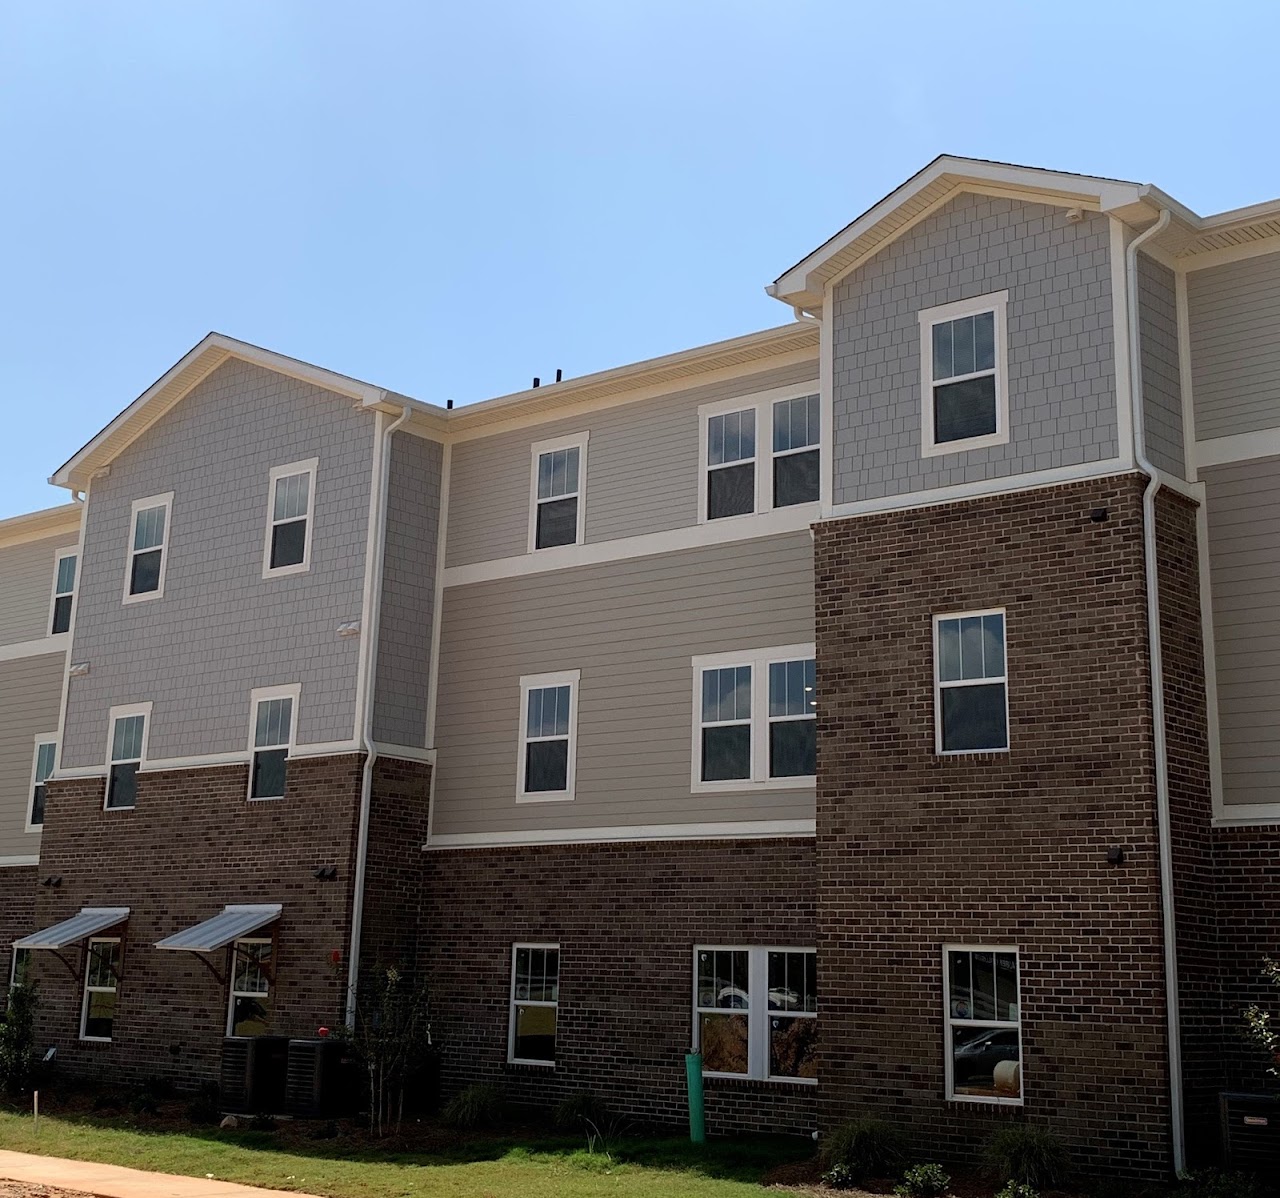 Photo of HARMONY AT CONYERS. Affordable housing located at 2001 WEST IRIS DRIVE, SE CONYERS, GA 30013